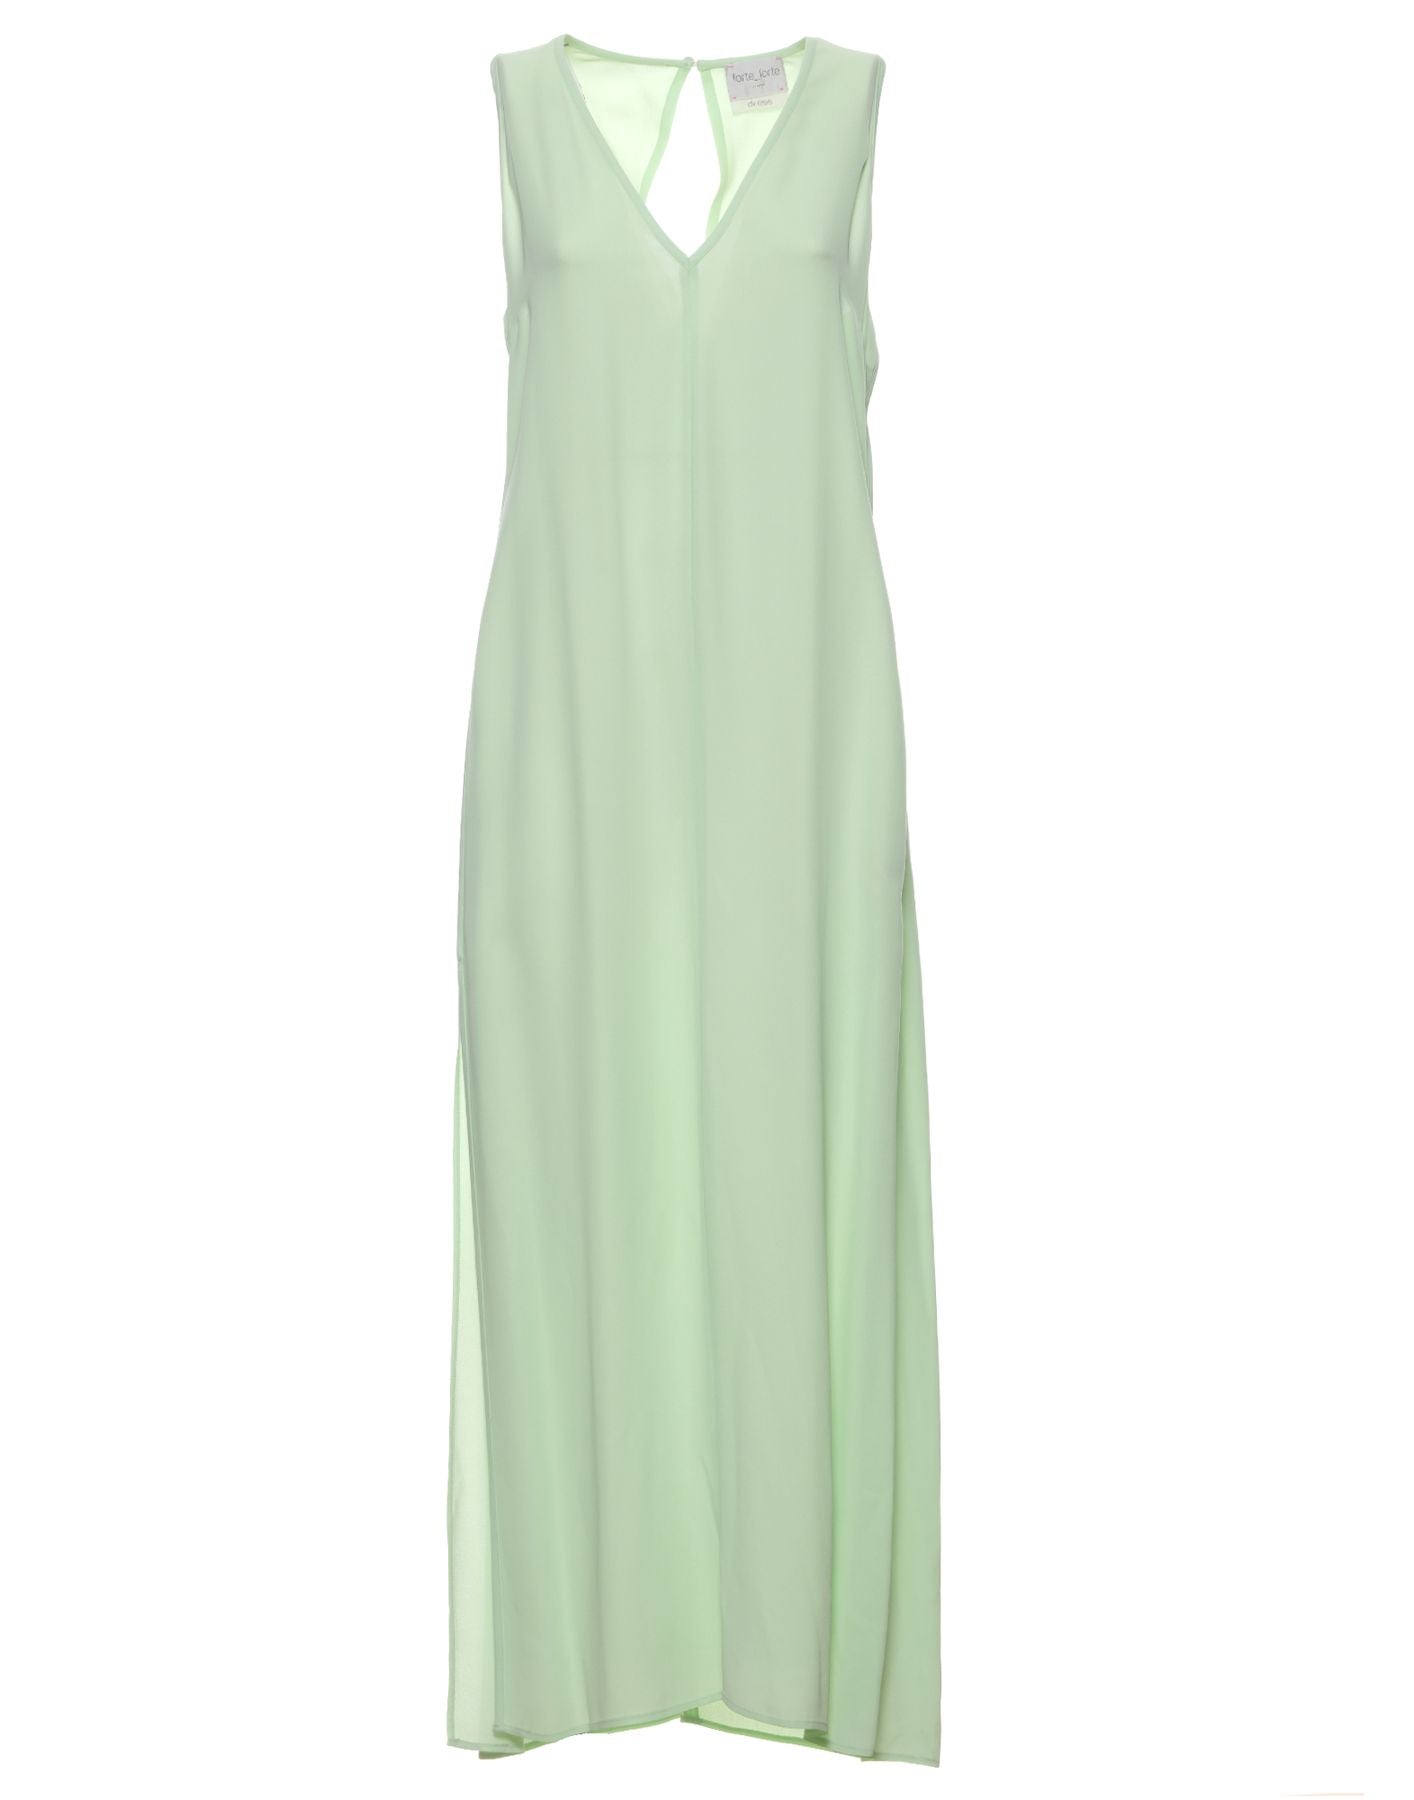 Robe pour femme 12061 MY DRESS ICE LIME FORTE_FORTE